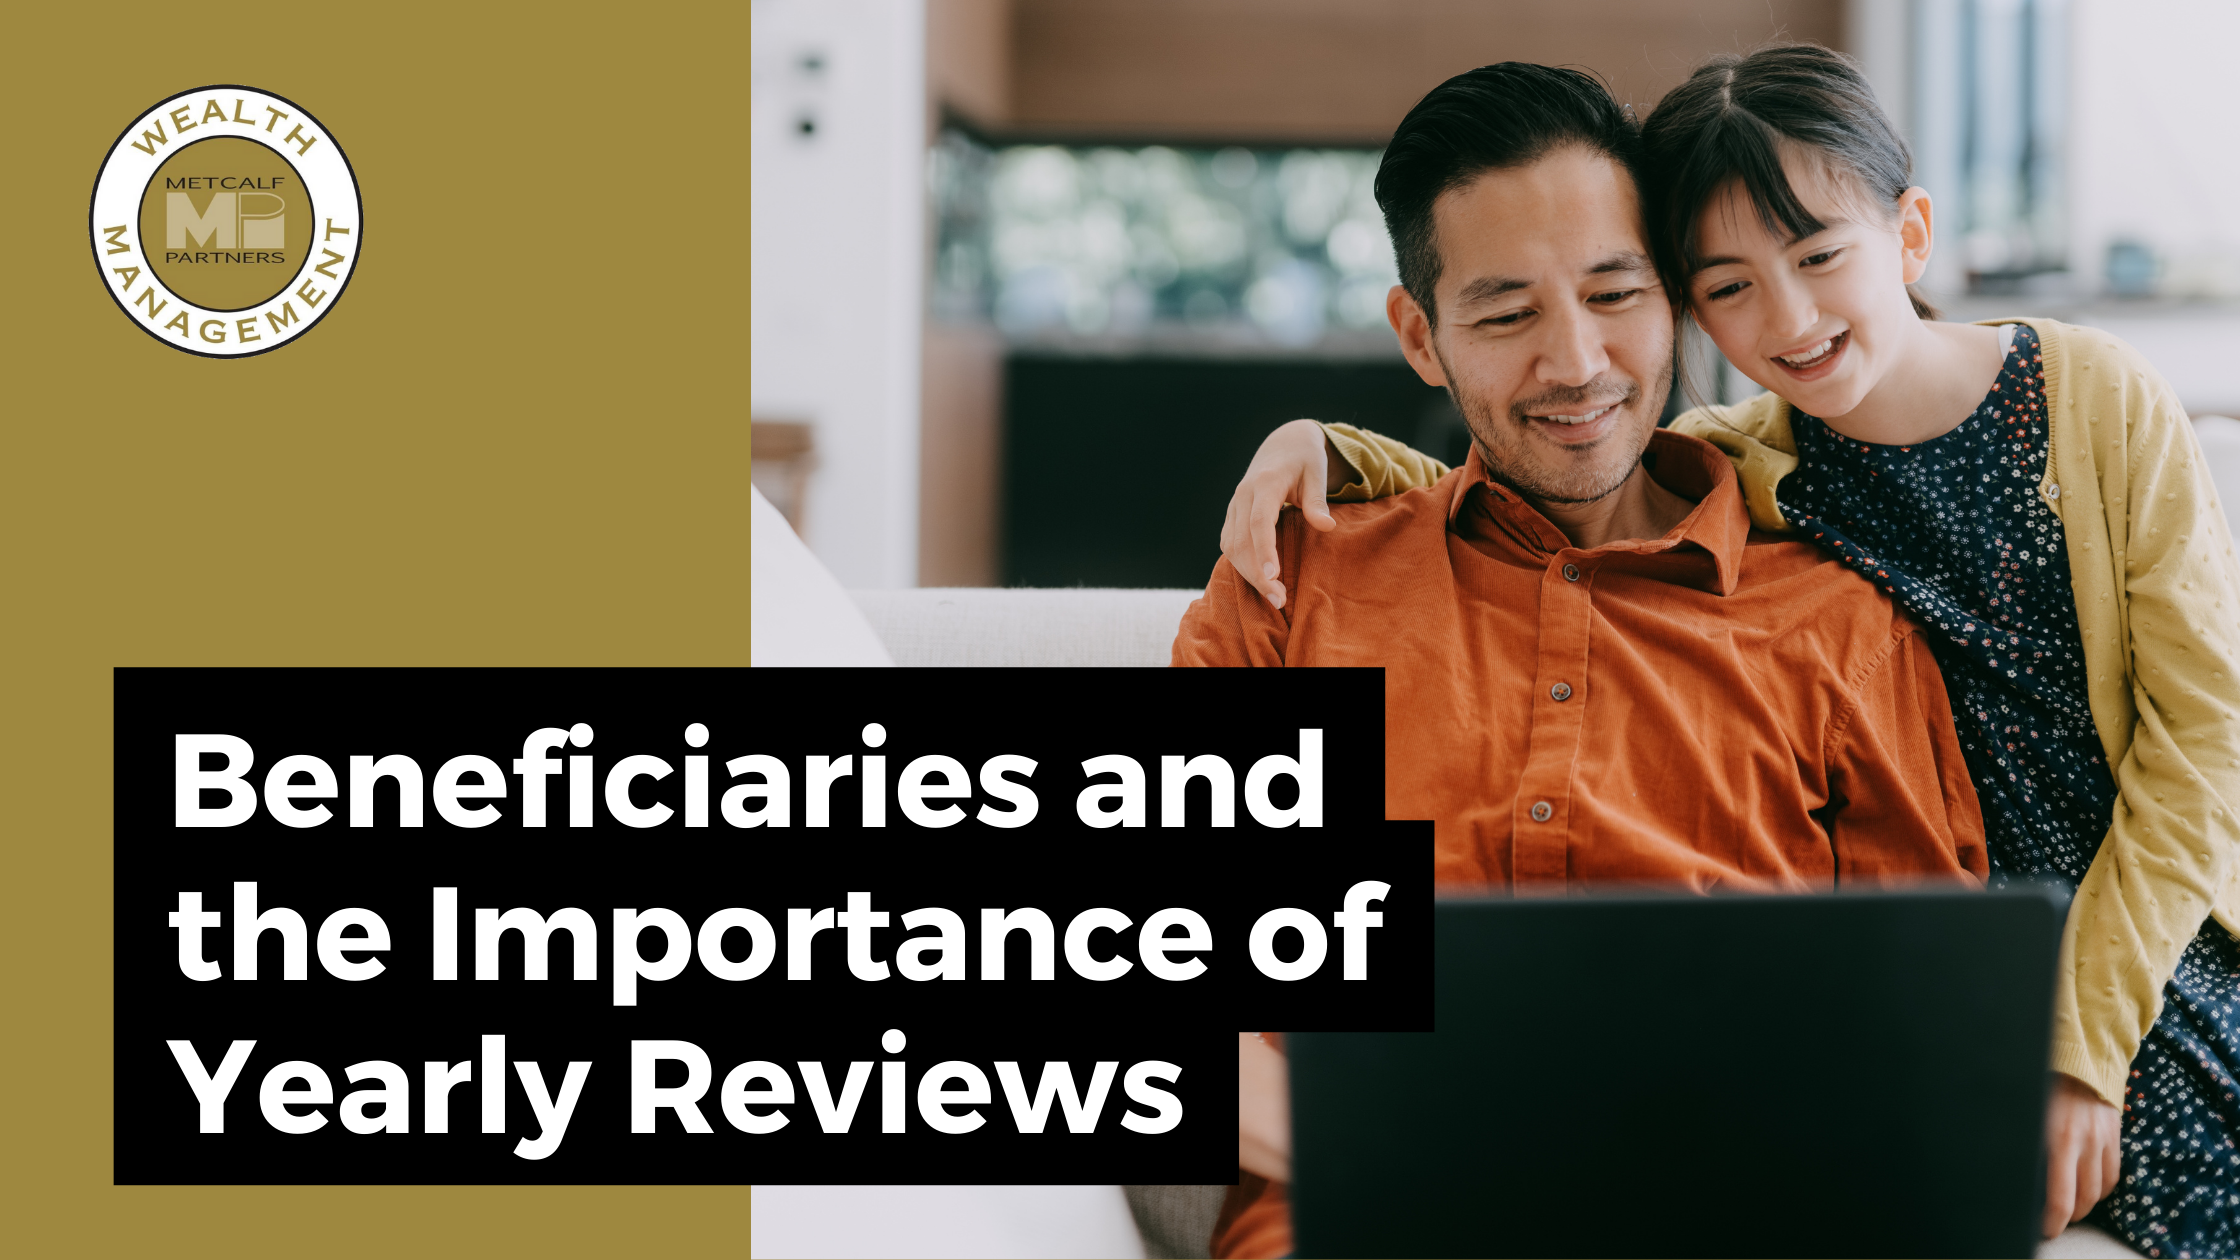 Featured image for “Beneficiaries and the Importance of Yearly Reviews”